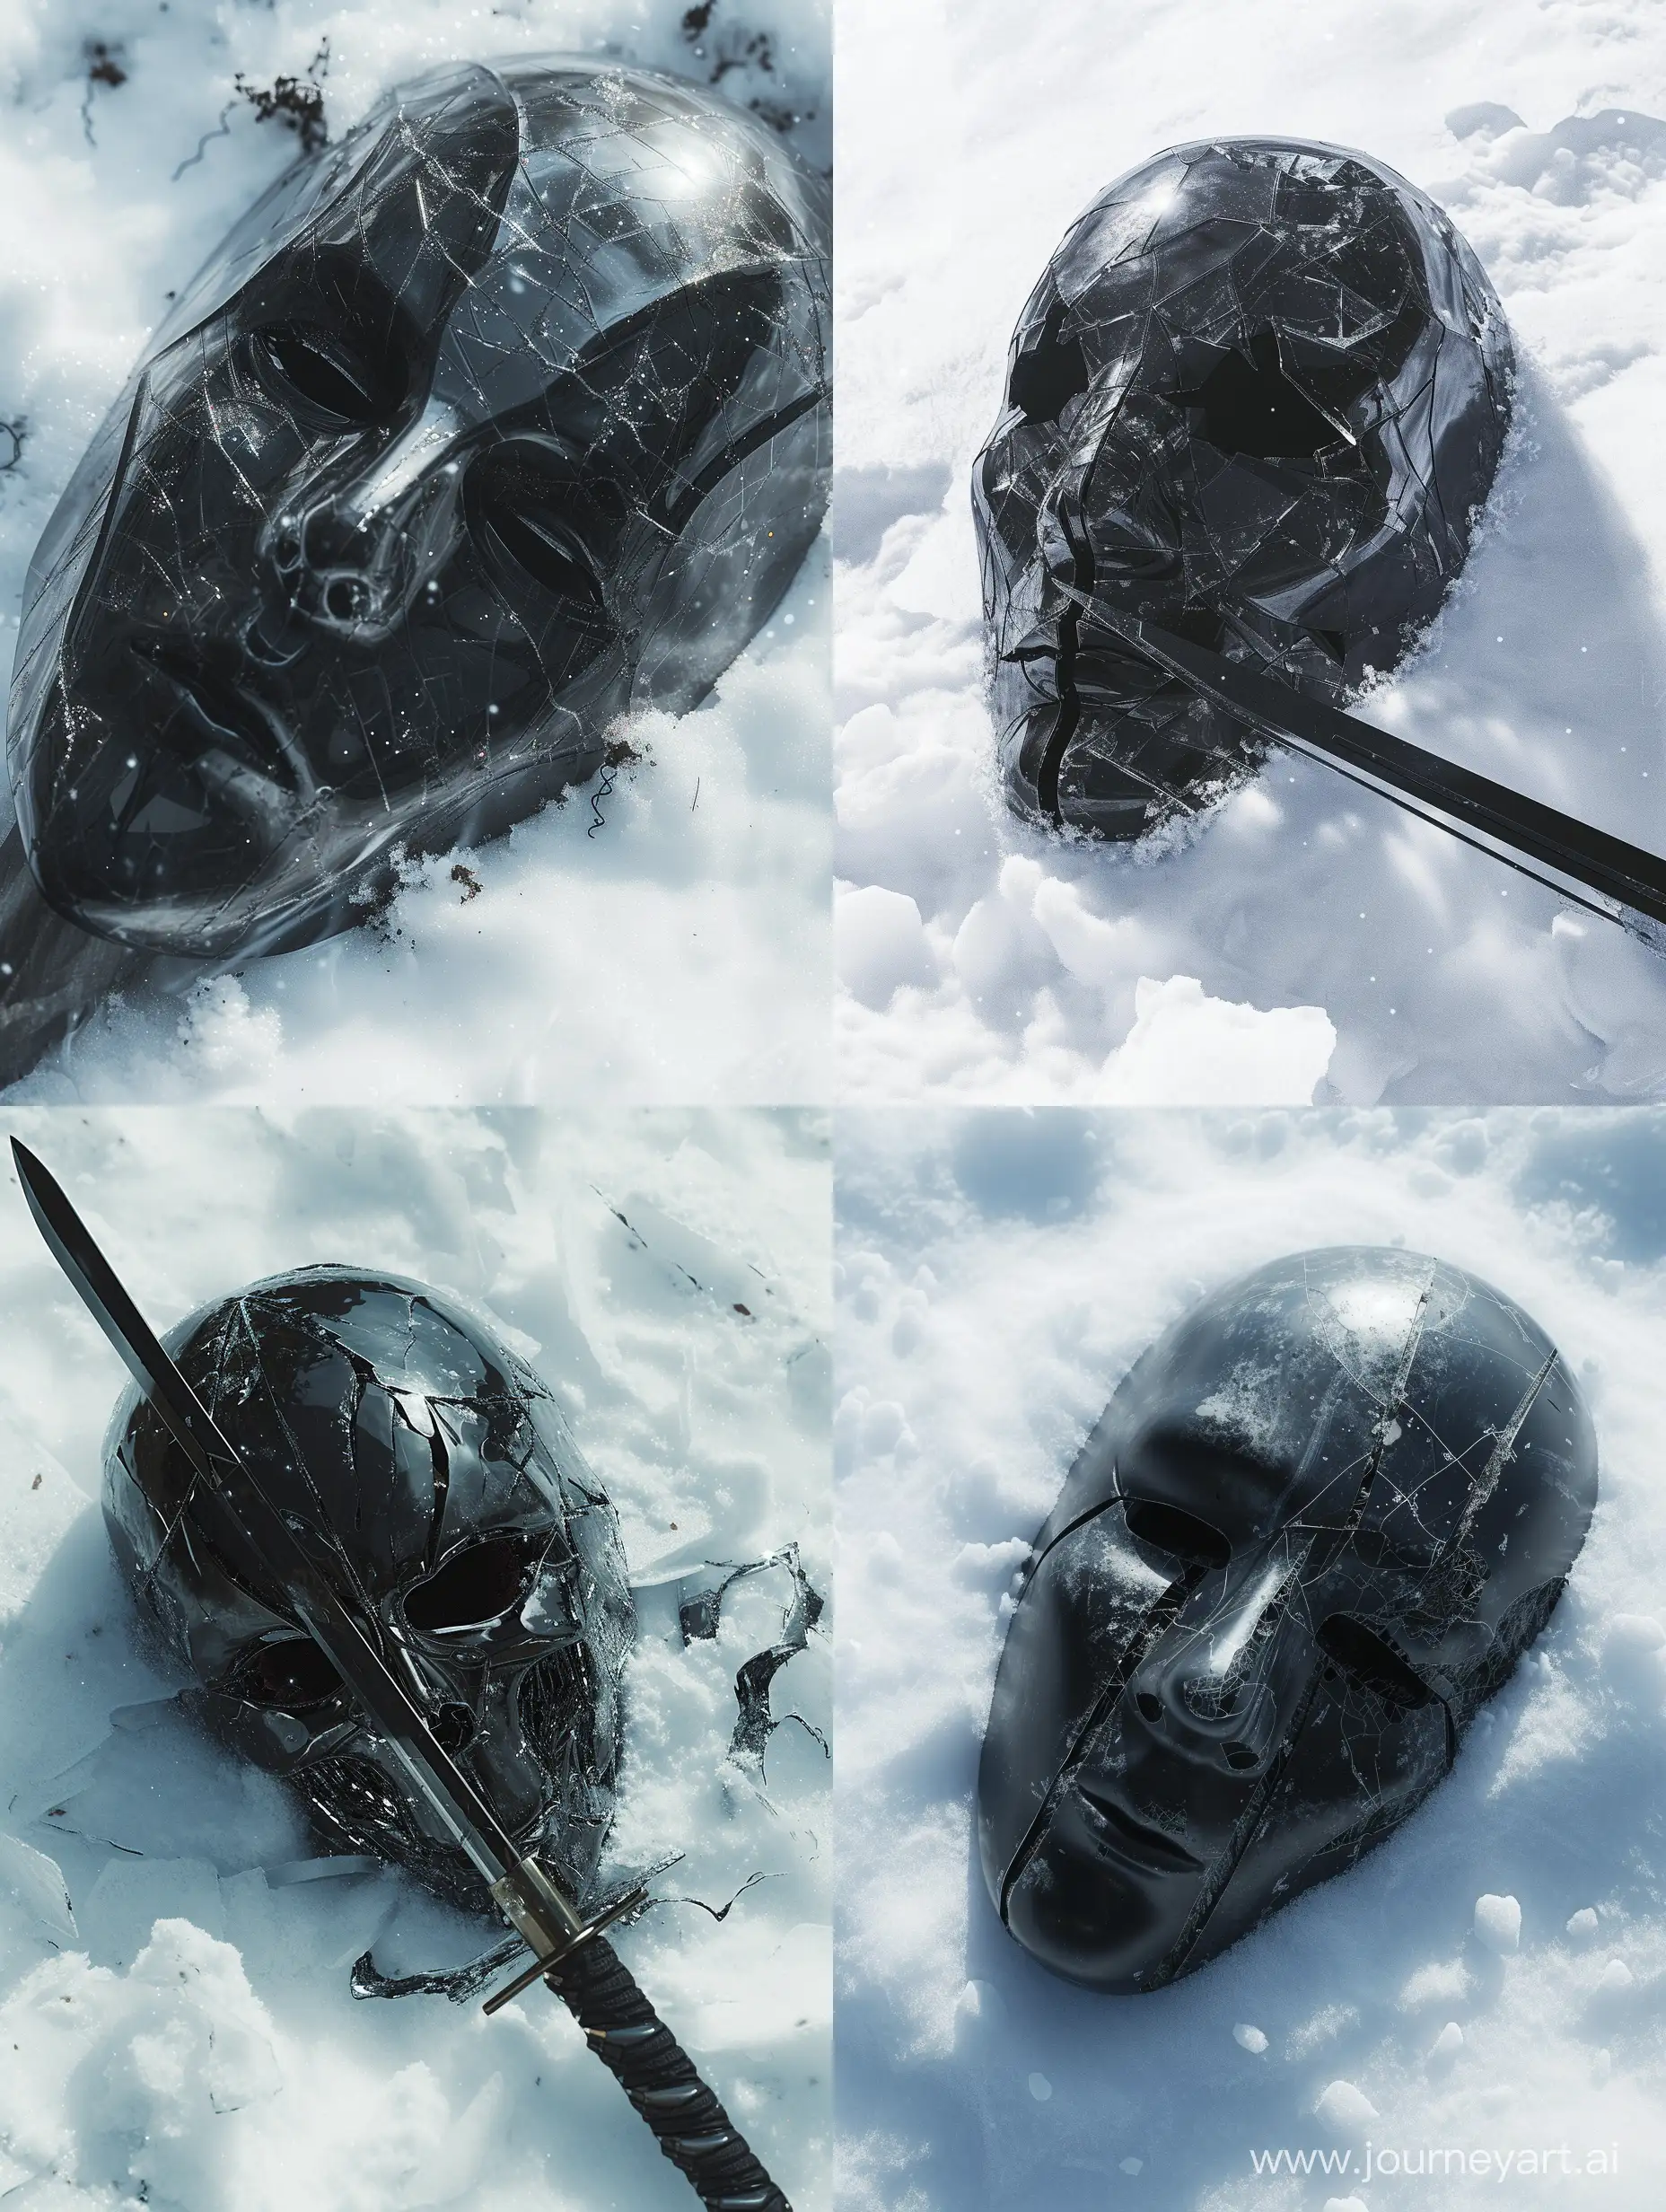 music album cover, clear art, black  sсi fi vibro sword mask lies in the snow, cracked, darksouls style